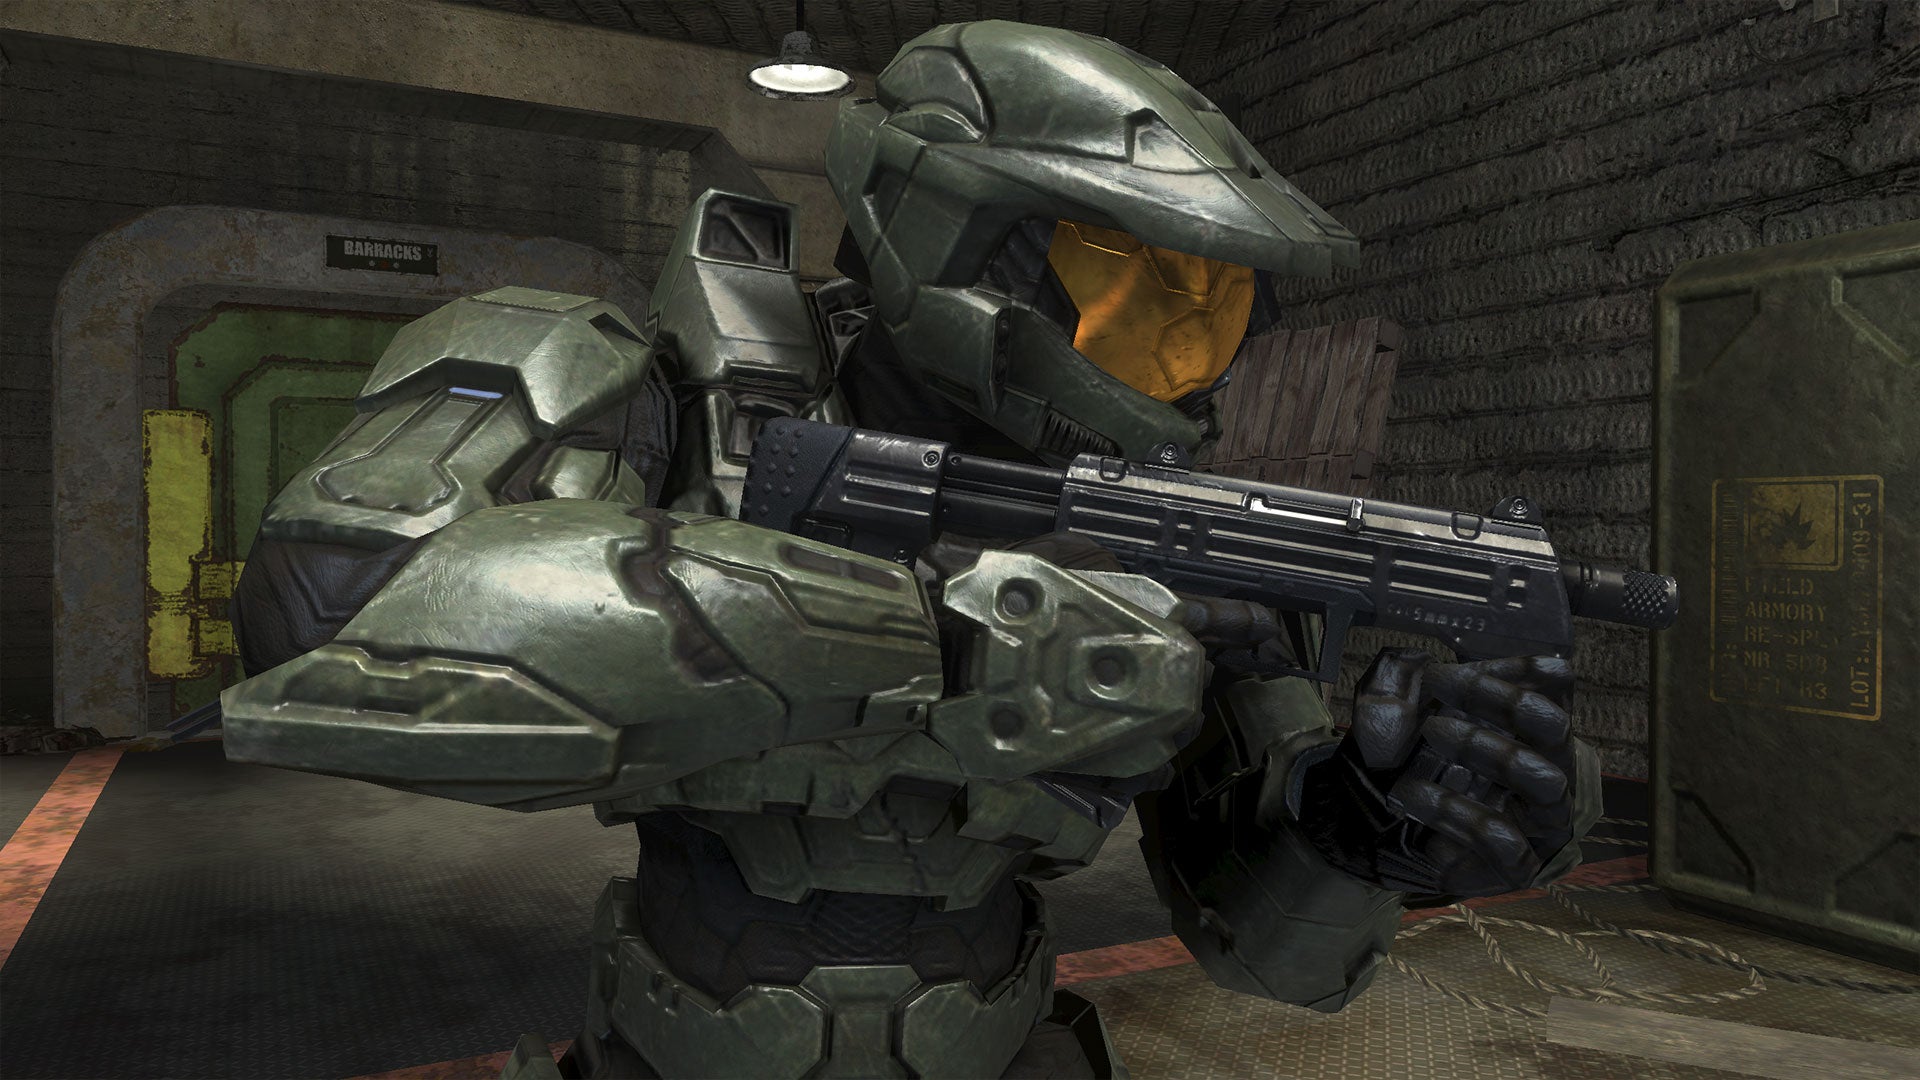 Image for The difference between Halo 2 and Halo 2 Anniversary cutscenes is astounding - video